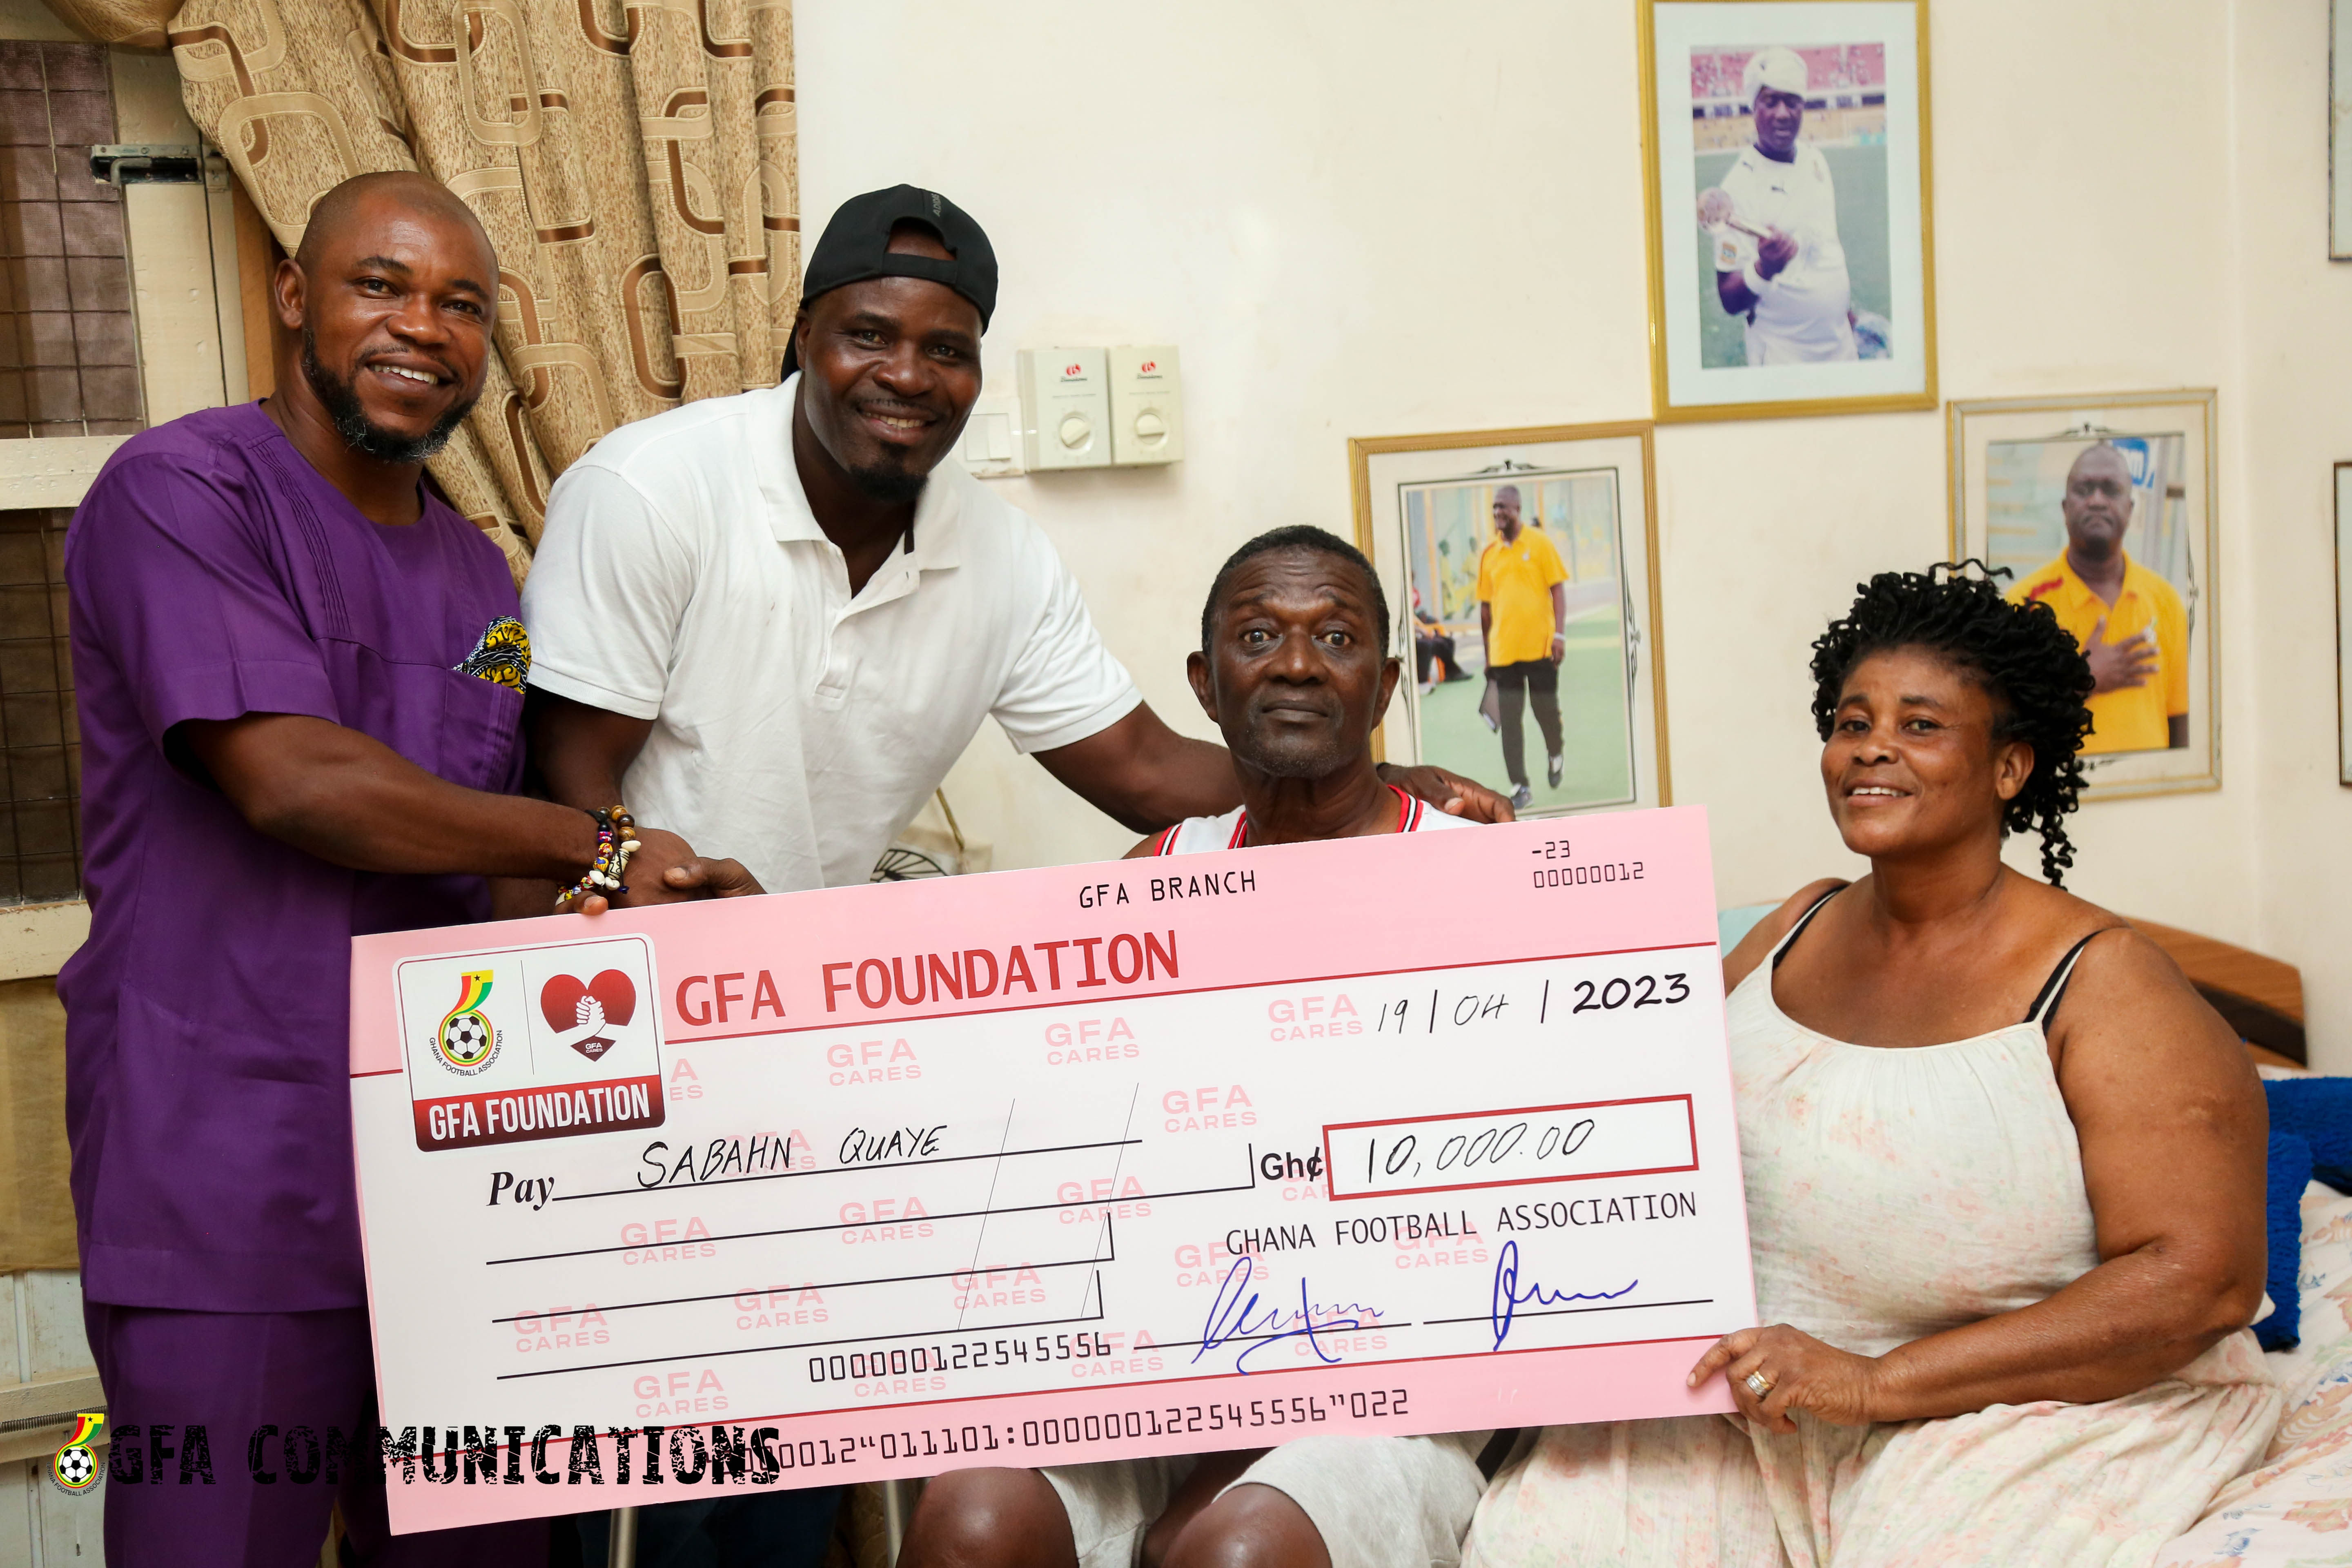 GFA Foundation extends goodwill to two former footballers Thomas and Sabahn Quaye